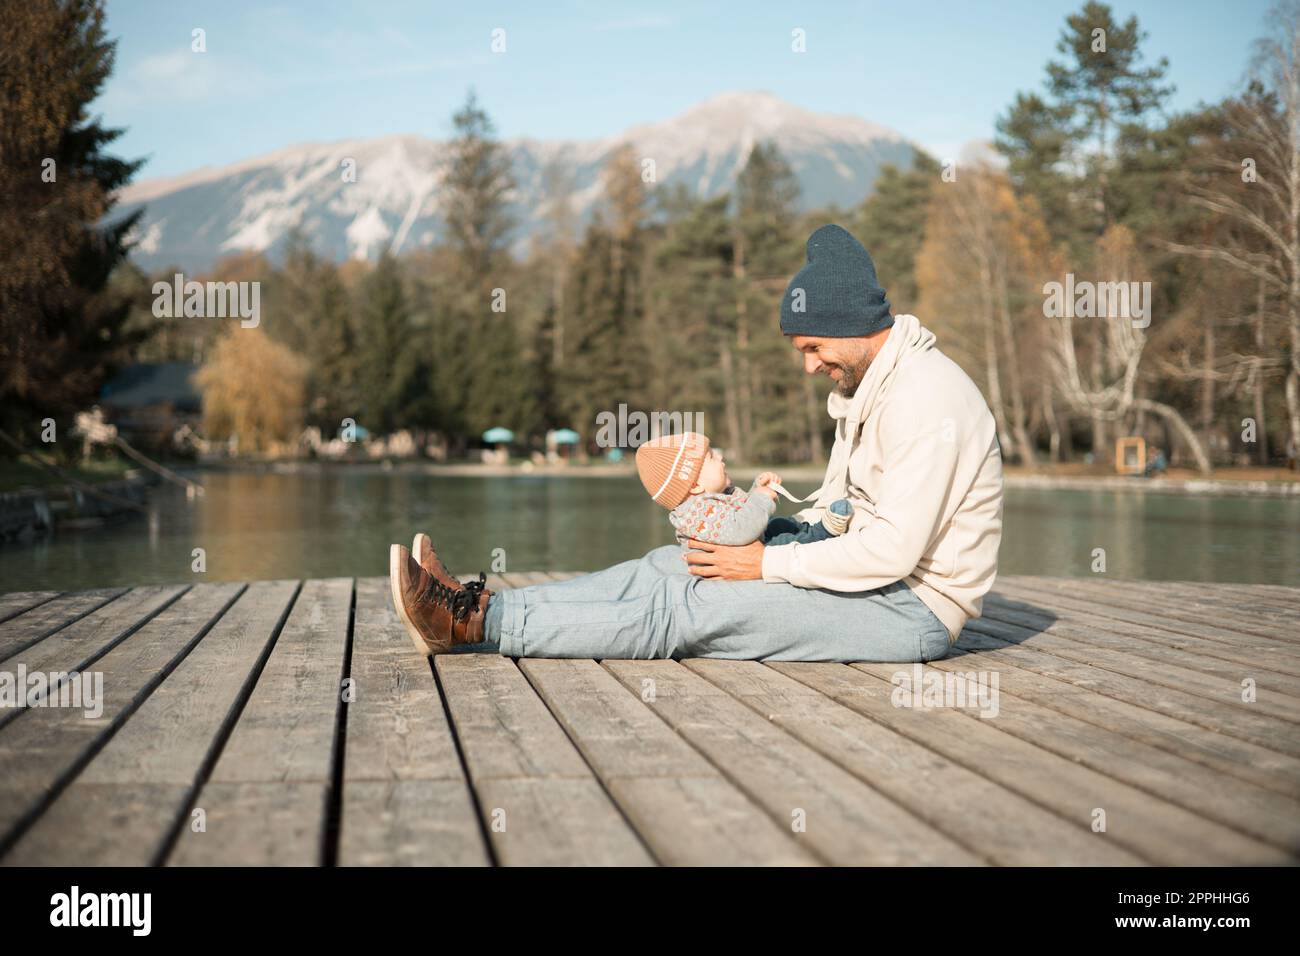 Happy family. Father playing with her baby boy infant oudoors on sunny autumn day. Portrait of dad and little son on wooden platform by lake. Positive human emotions, feelings, joy. Stock Photo